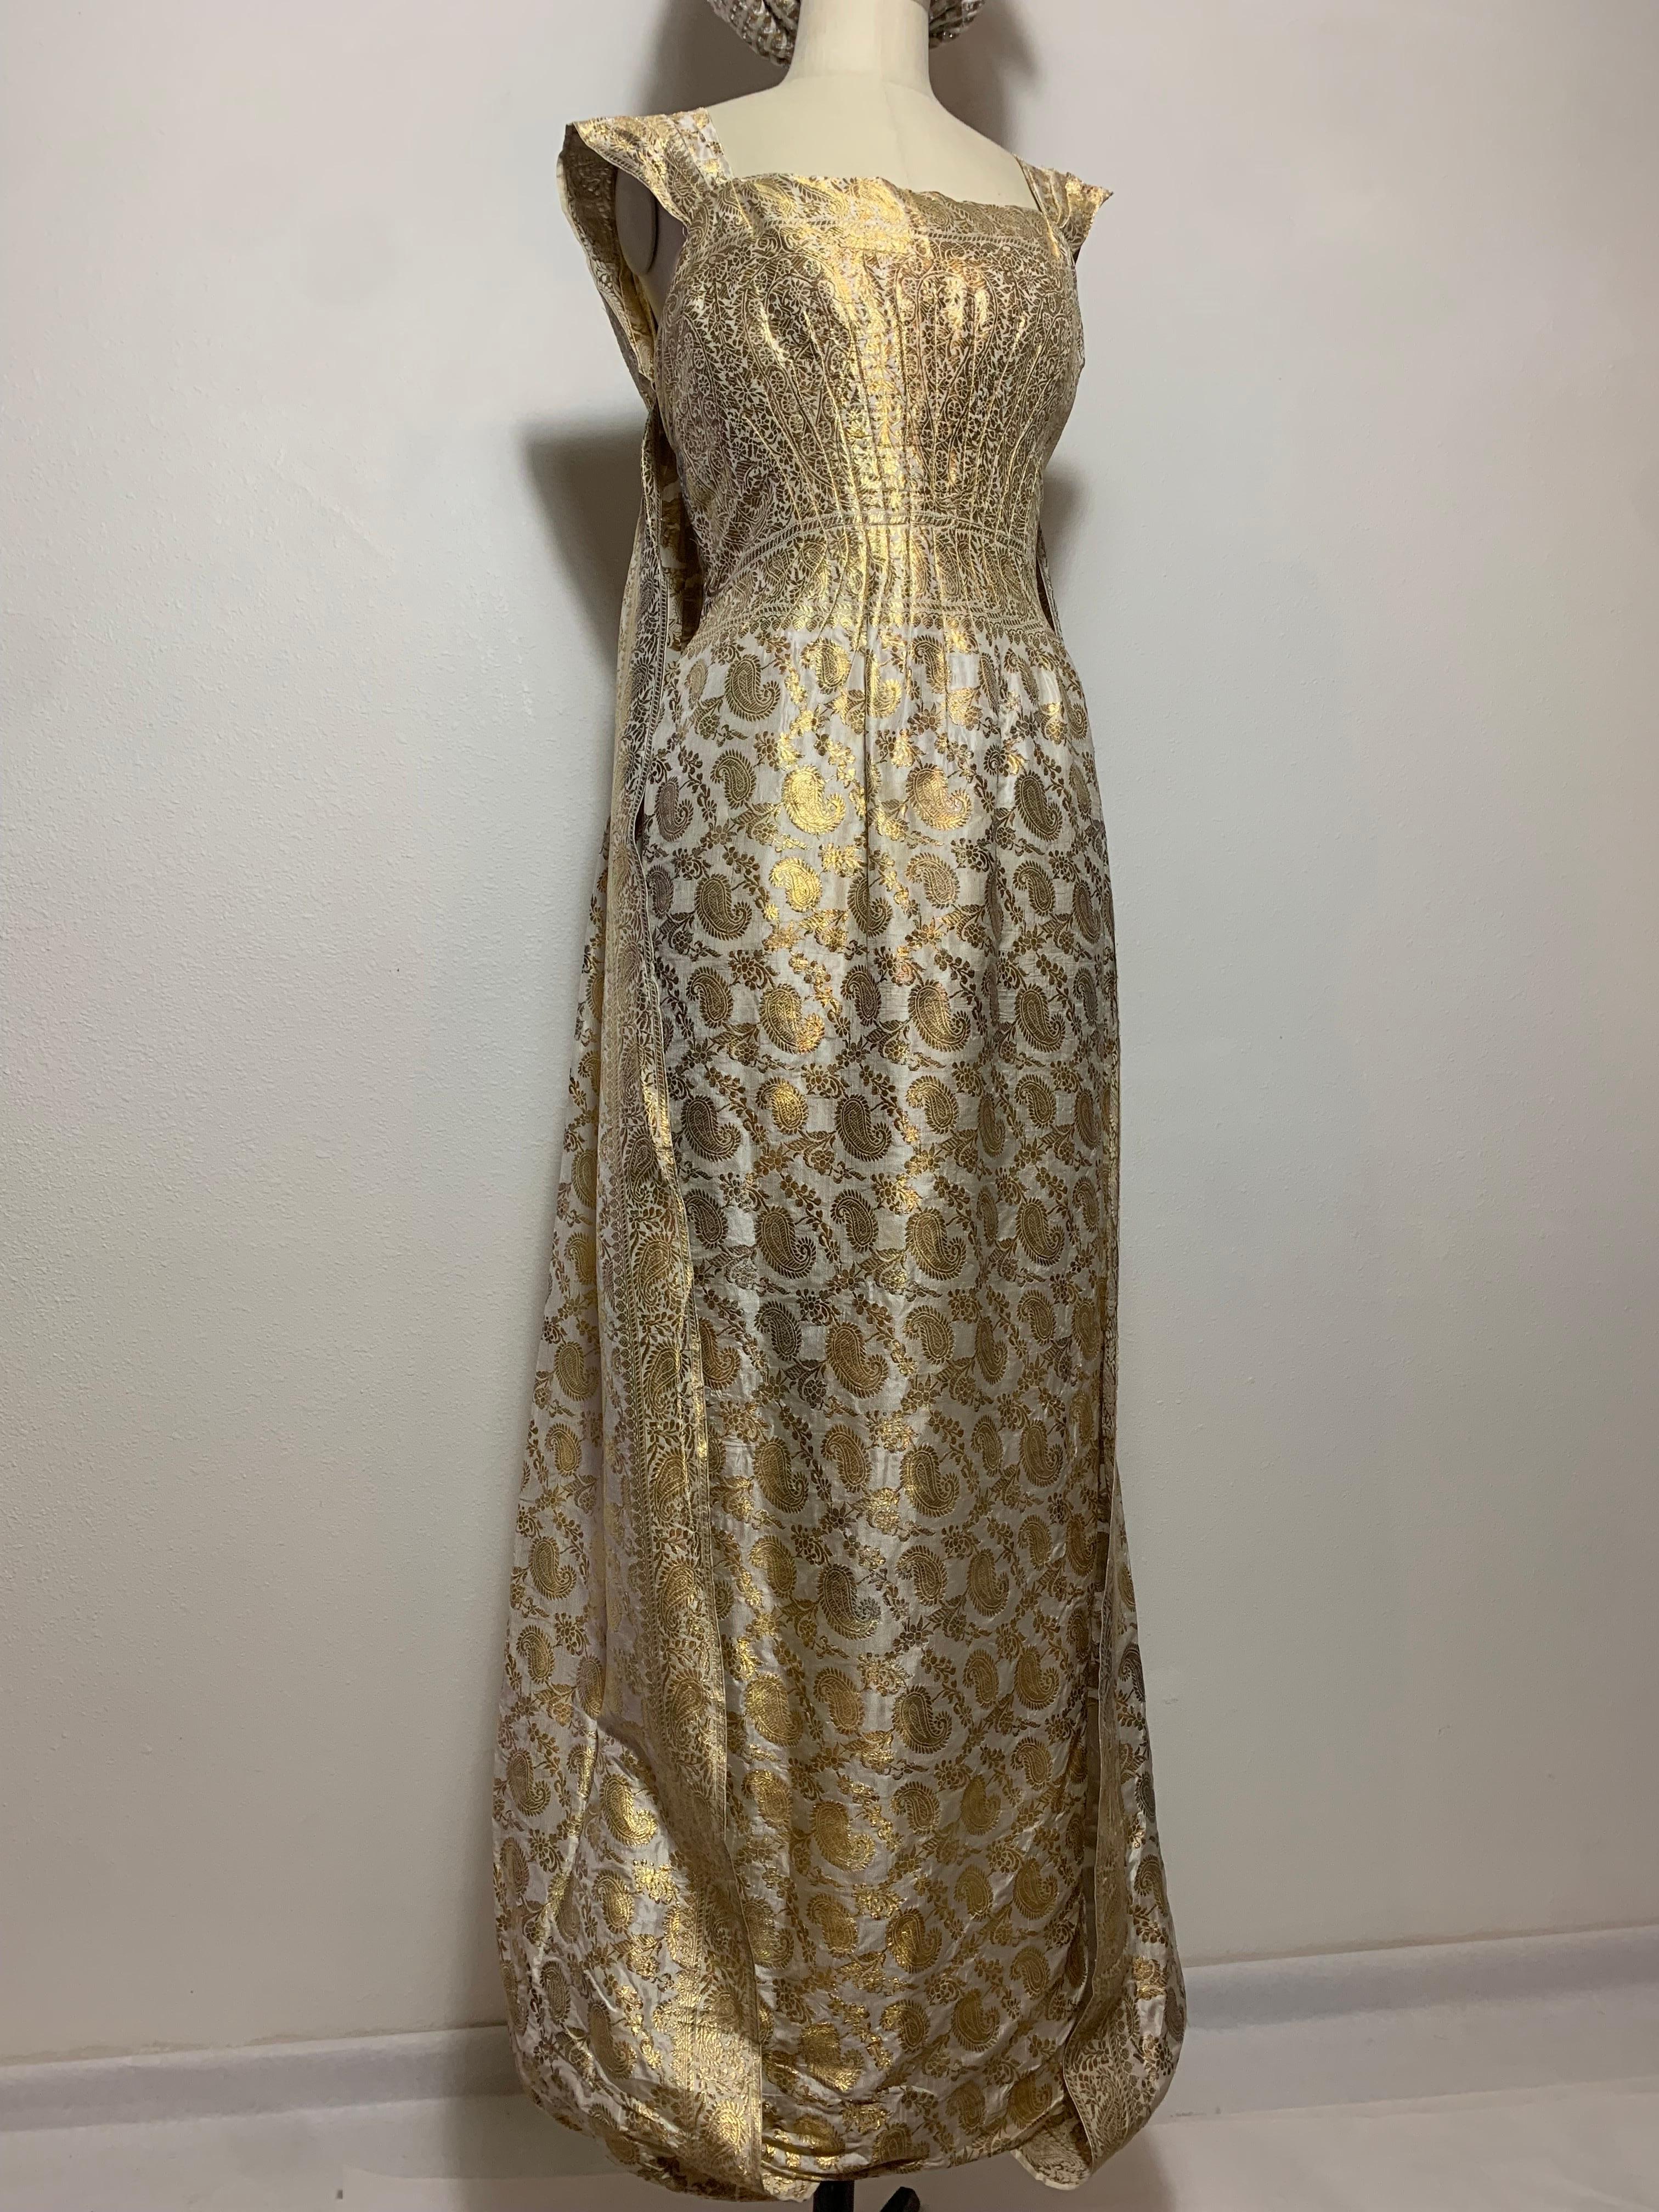 1950s Dorothy McNab Gold Lame & White Silk Sari-Inspired Gown w Draped Attached Waterfall Back, and Incredible Princess Seamed Bodice.  Gold lame woven paisley patterns are seamed and darted at bodice to create a solid gold waist panel. Pleated